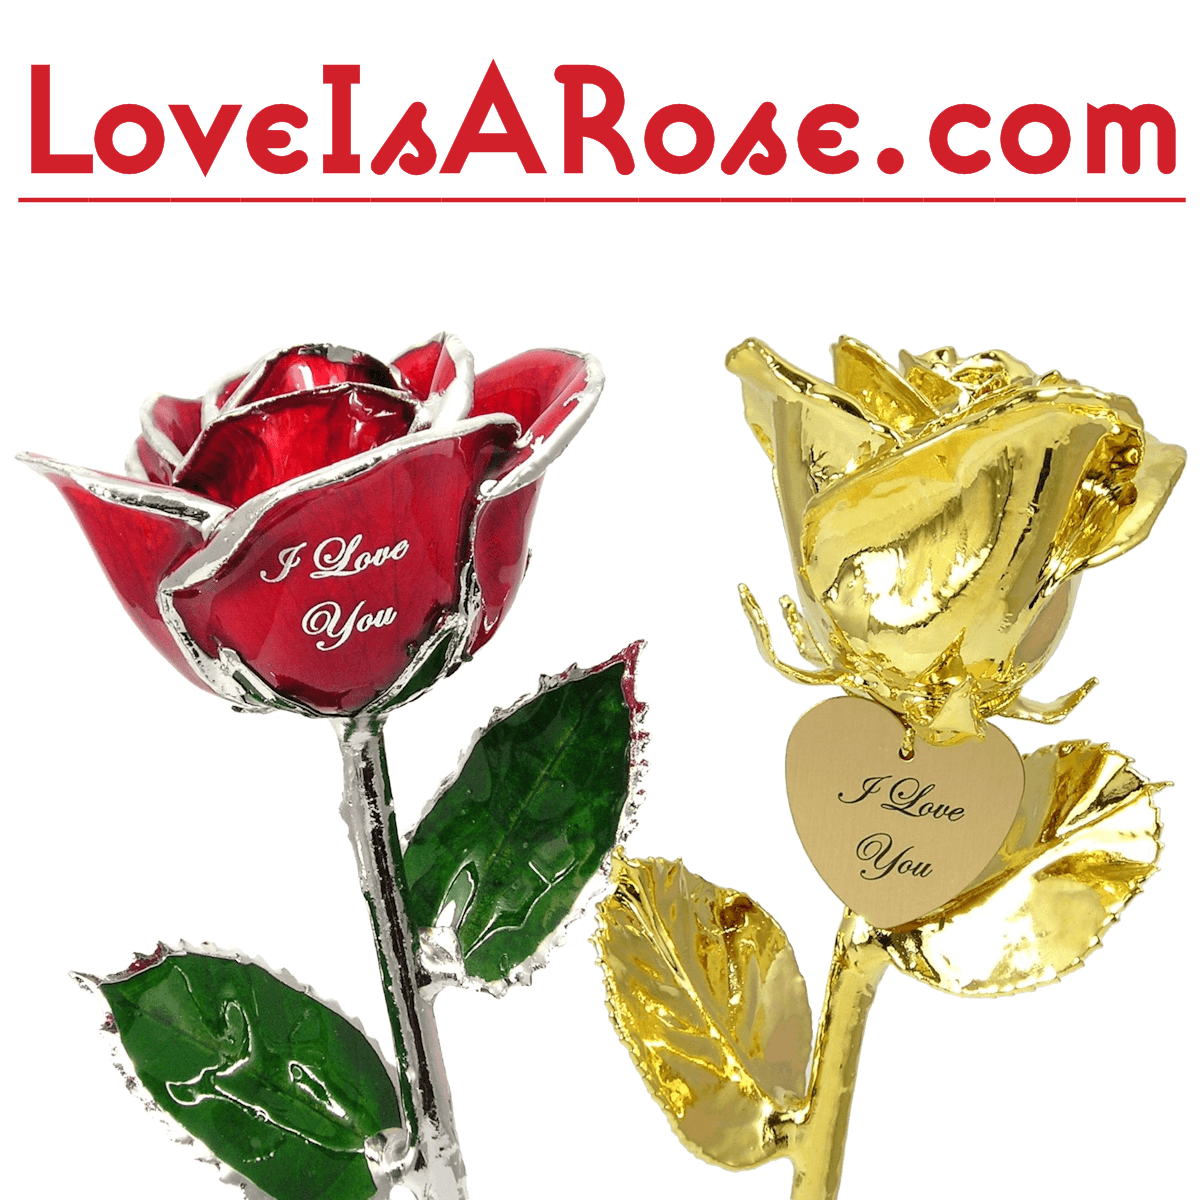 Thanksgiving Day Birthday Mothers Day SW Black Real Rose Dipped in 24k Gold Foil Elegant Flower Eternal Love Romantic Rose Decor Gift w/Nice Box for Valentines Day 